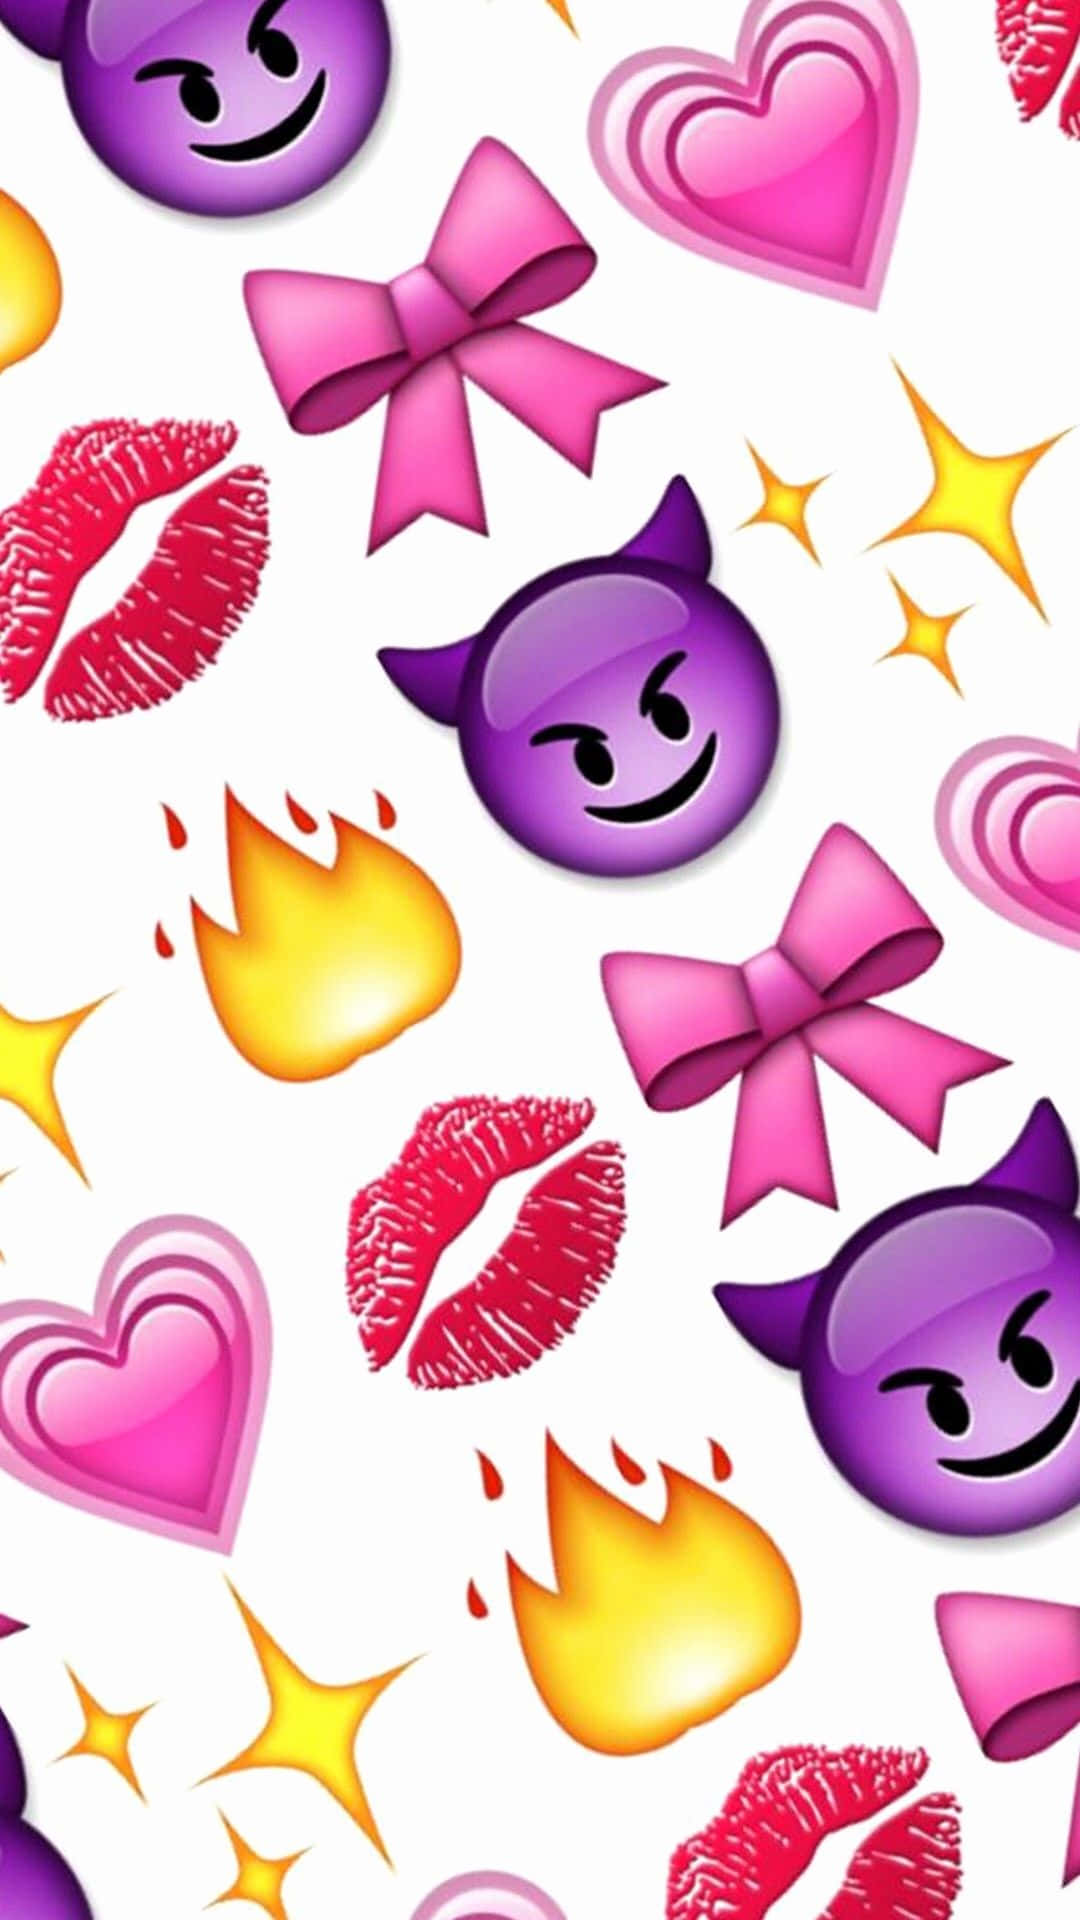 Send Your Loved One A Special Message With A Cute Emoji. Wallpaper